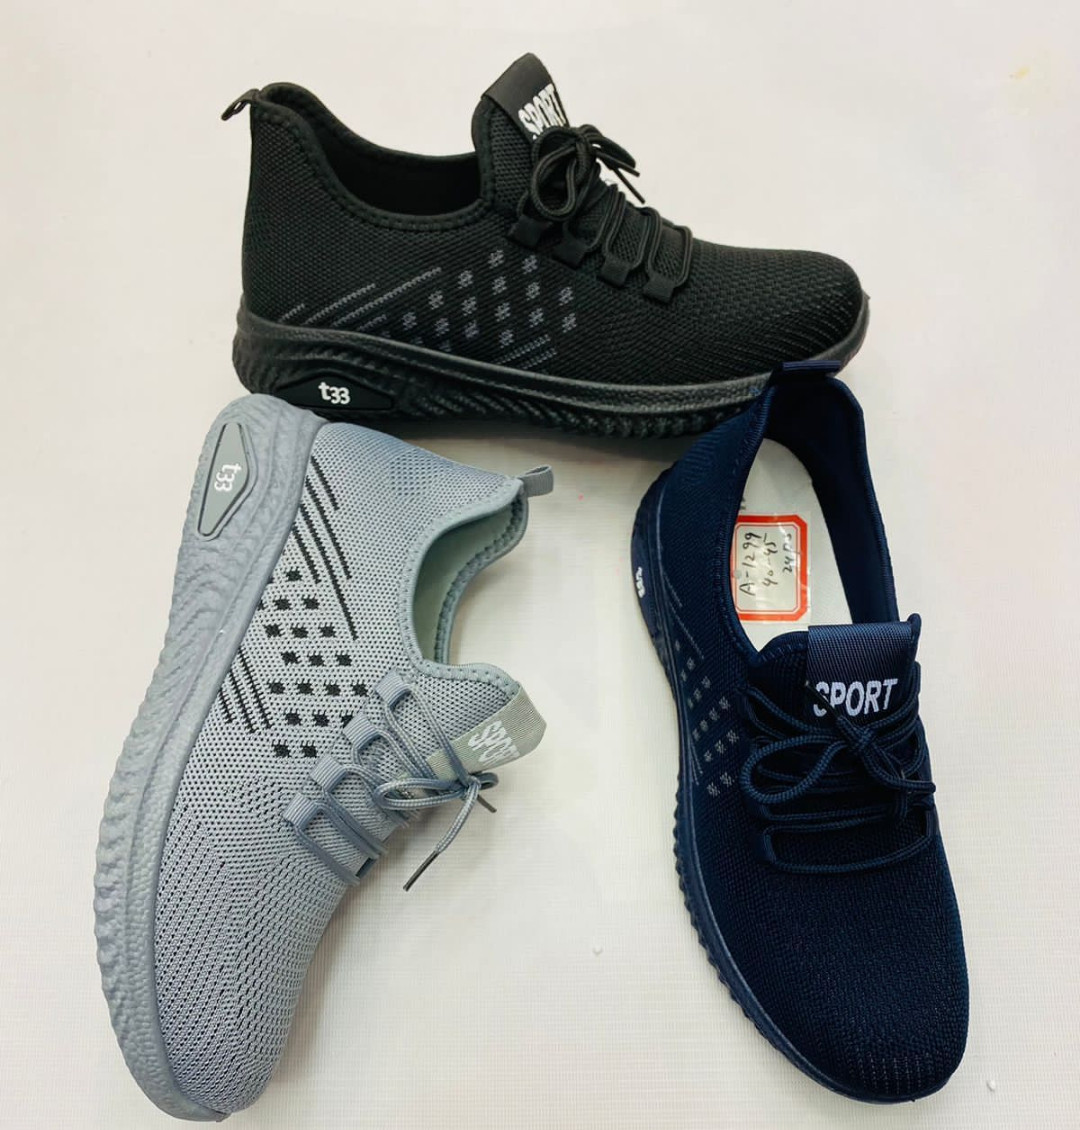 Men's Slip-on Shoes Walking Casual Shoes Breathable Fashion shoes Running Lightweight non-slip shoes Black - Grey - Dark Blue (24 pairs in one BOX) Size 40 to 45